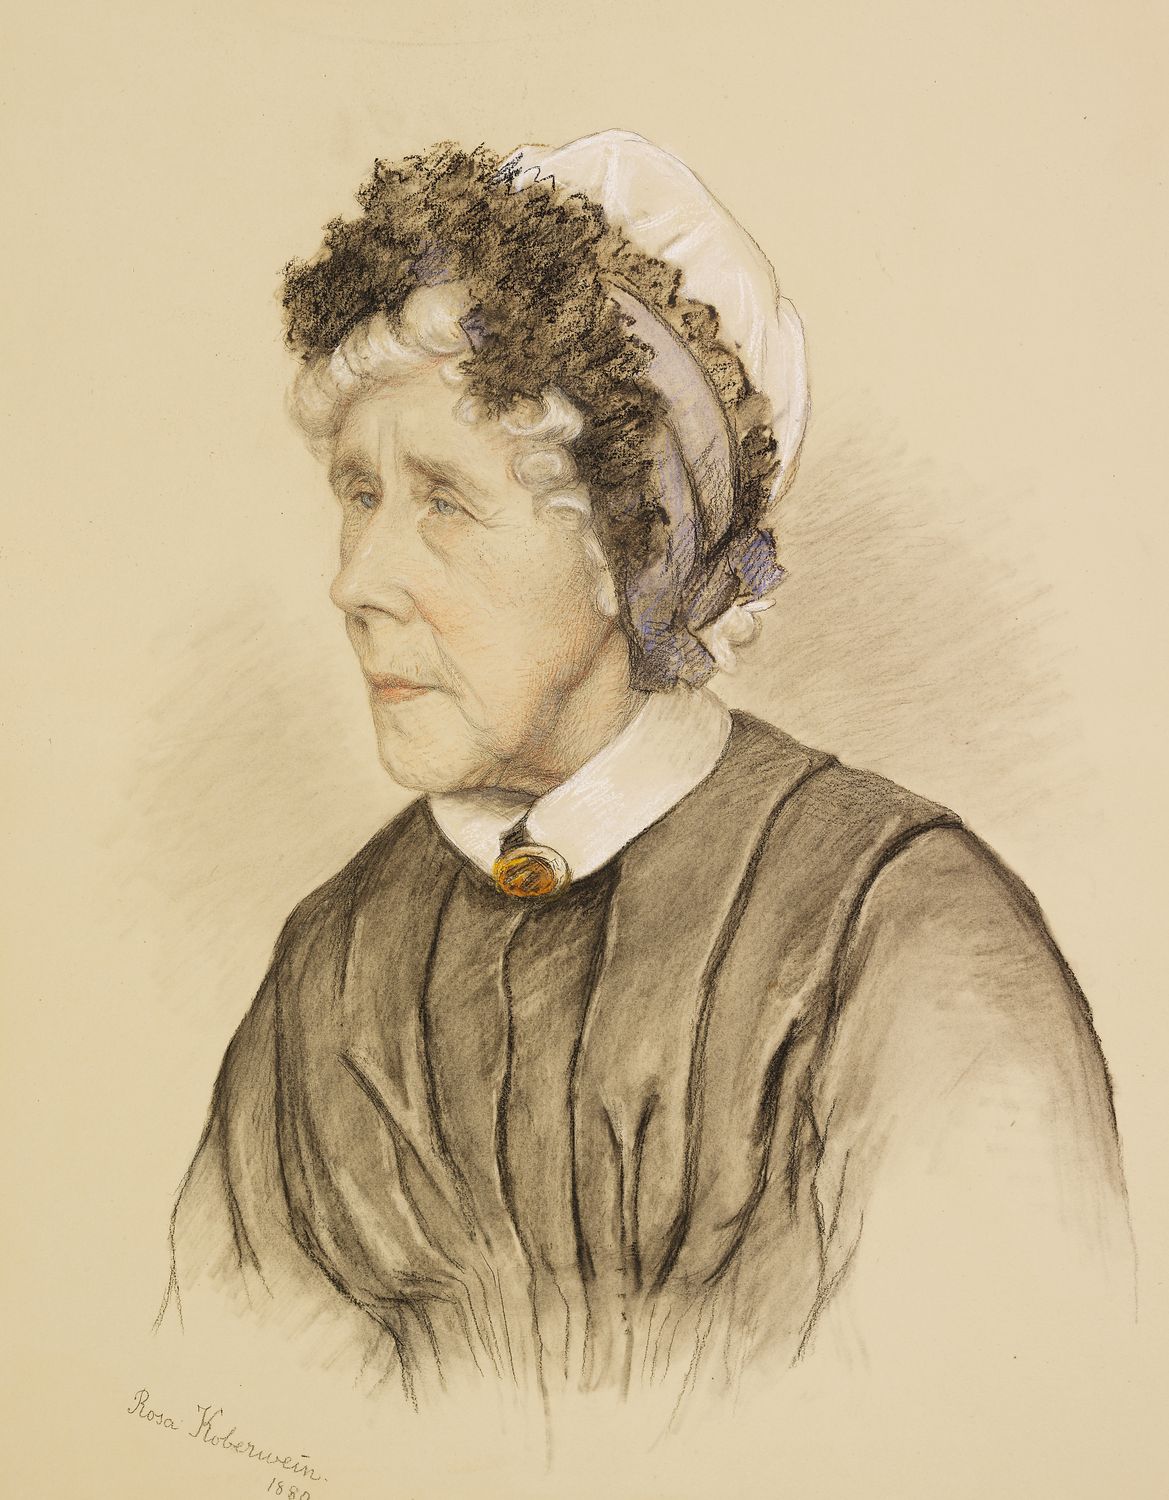 A head and shoulder portrait, in coloured chalks, of Marianne Skerrett, Head Dresser and Wardrobe Woman to Queen Victoria. She is turned to the left, wearing a cap with a dark frill and a brooch on the collar of her dress. Signed and dated.
Marianne Skerr